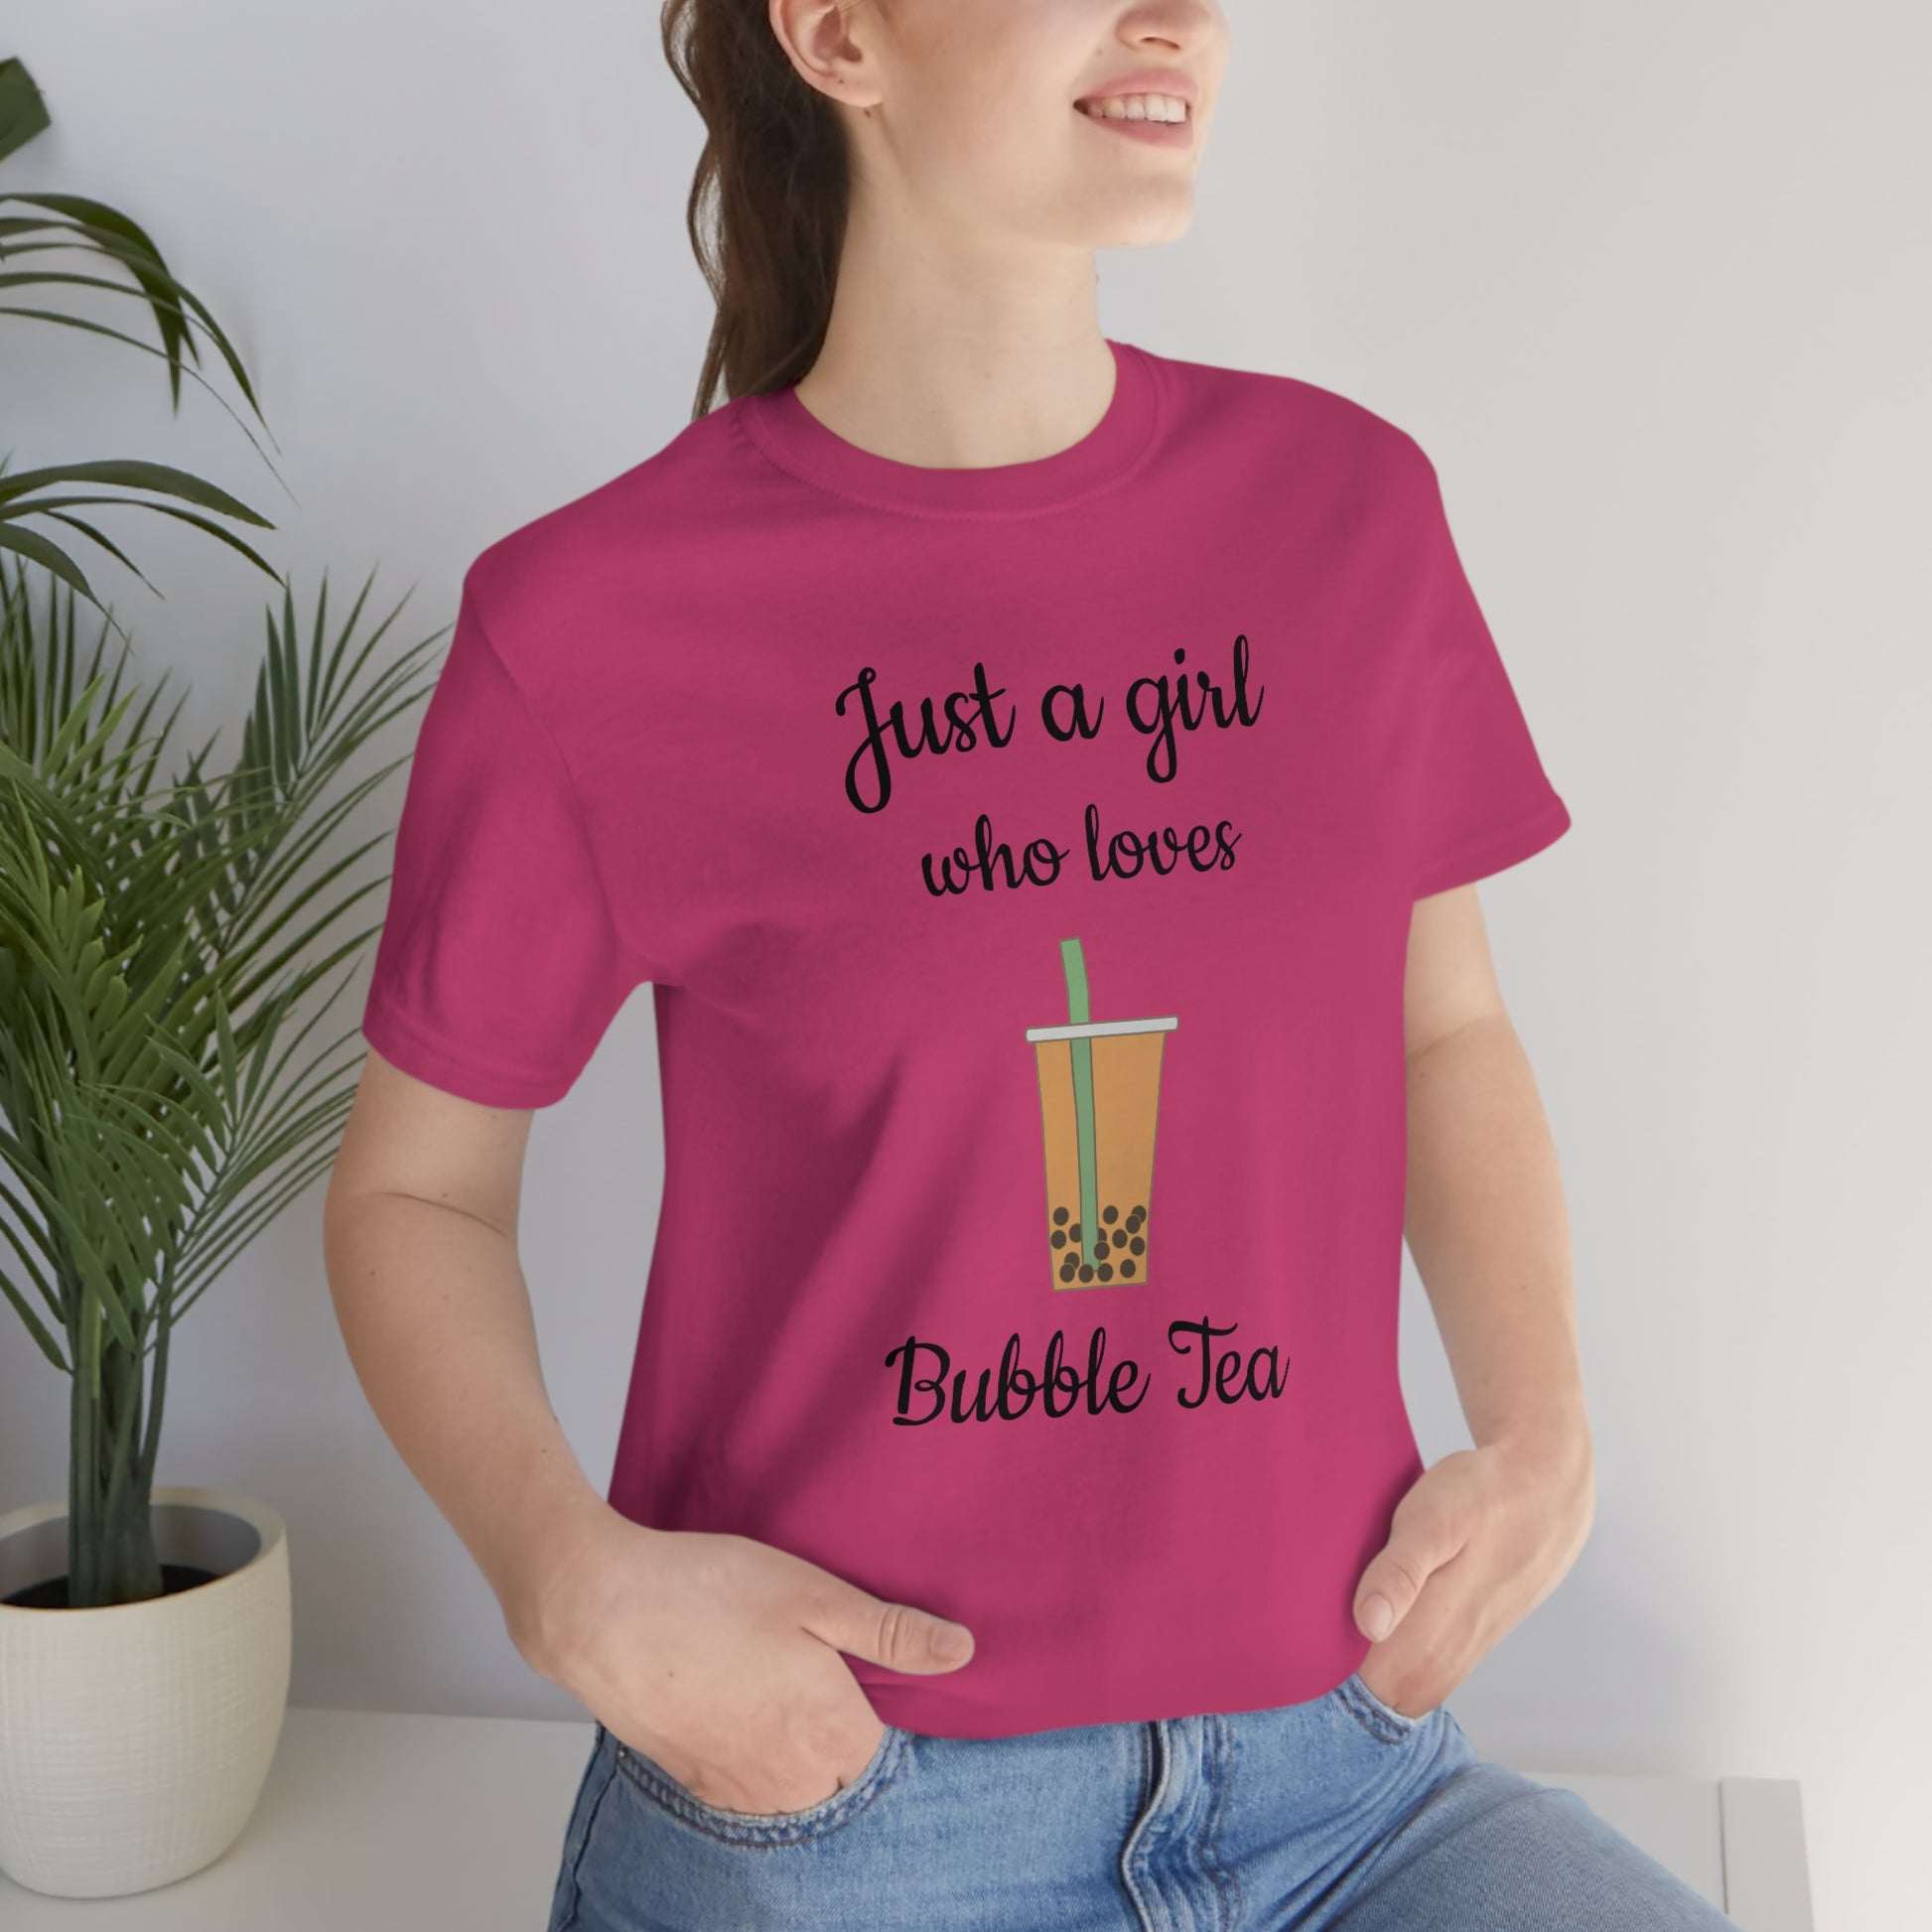 Just a girl who loves bubble tea - Designed - Unisex Short Sleeve Tee - CrazyTomTShirts